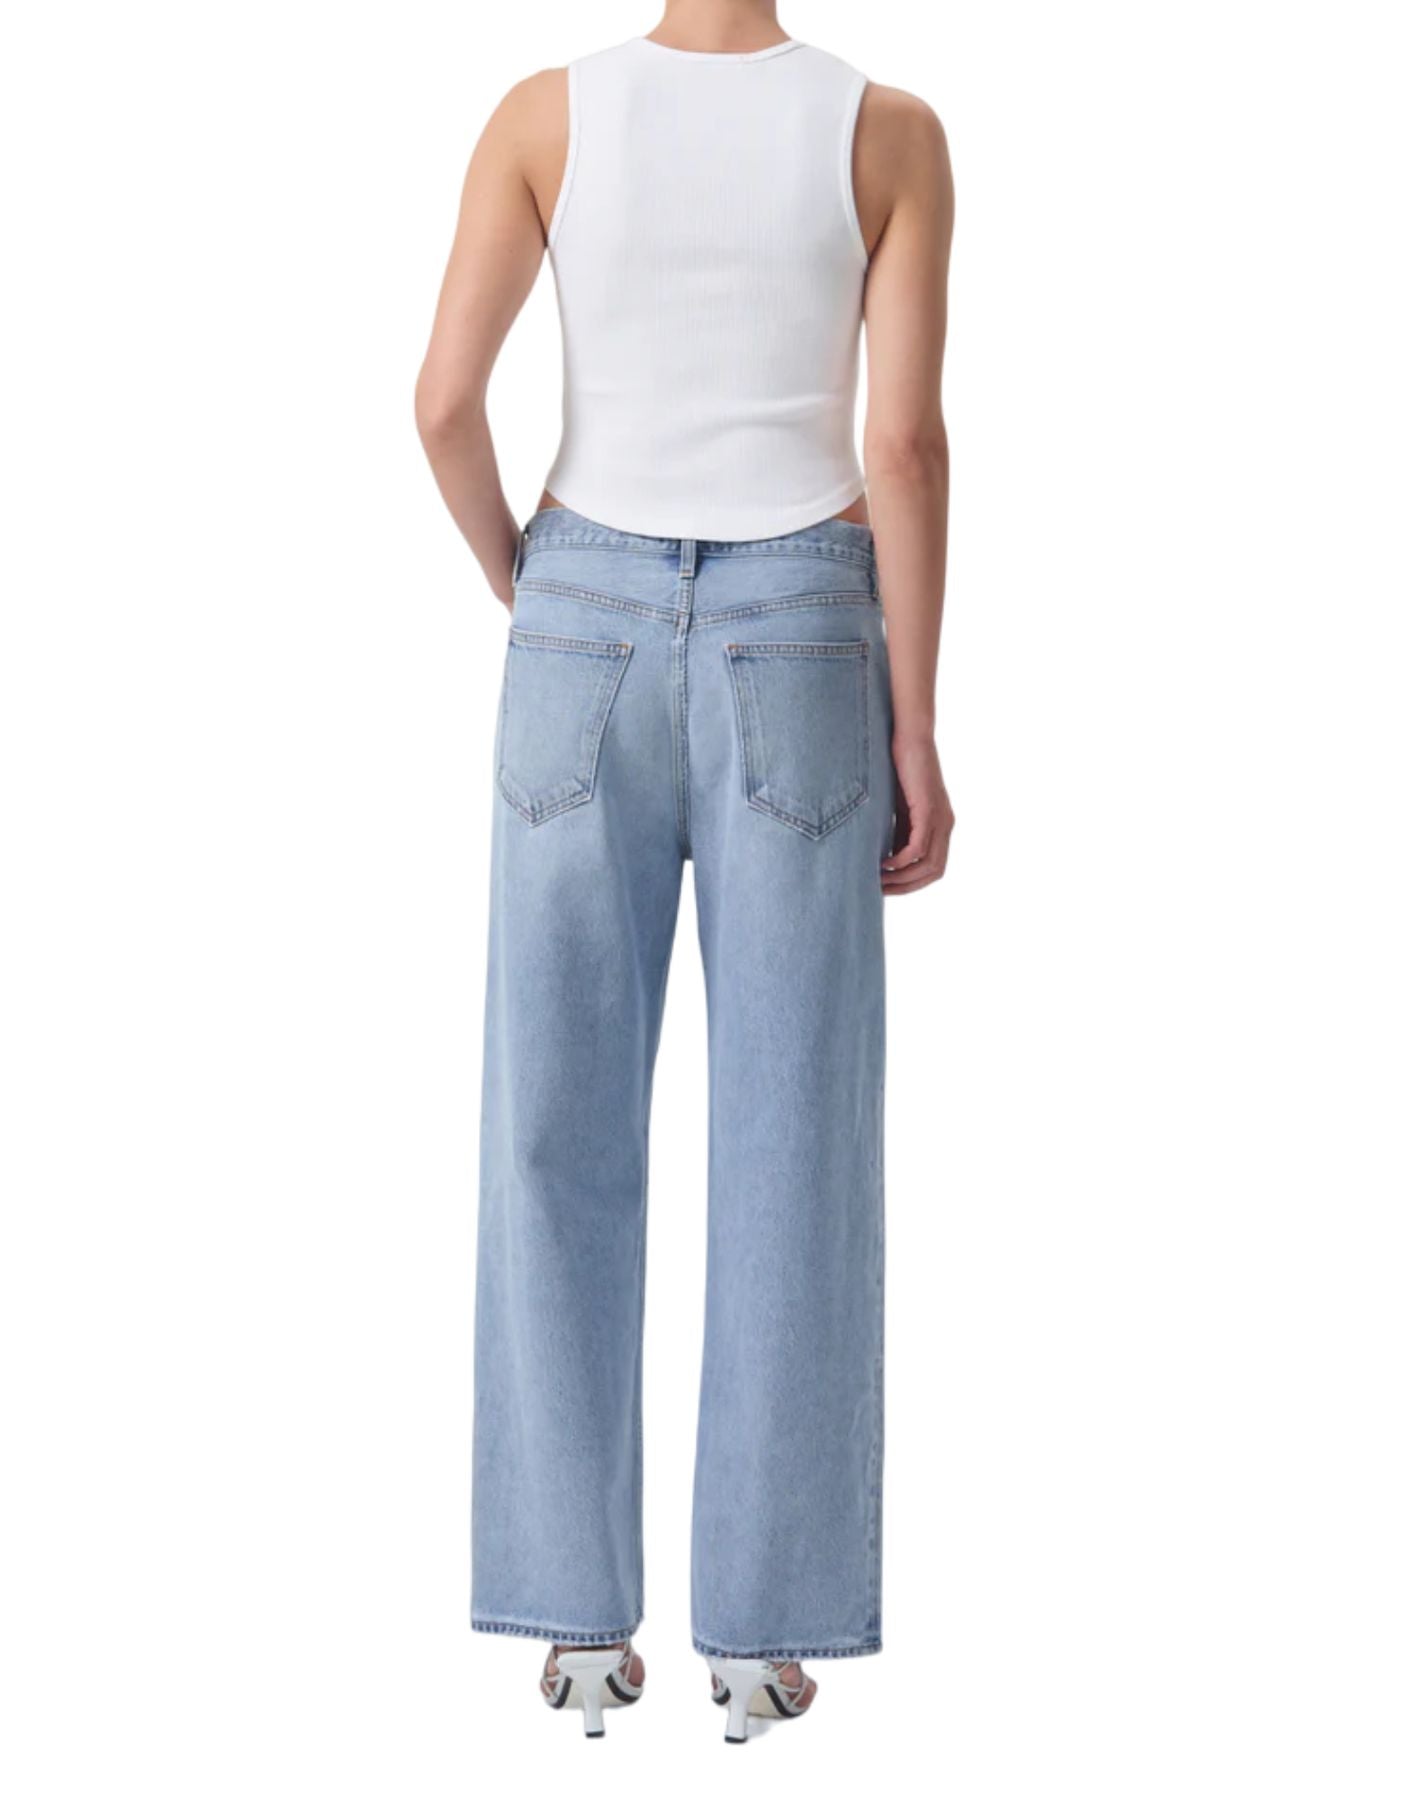 Jeans for woman A9079-1535 LIBERTINE Agolde